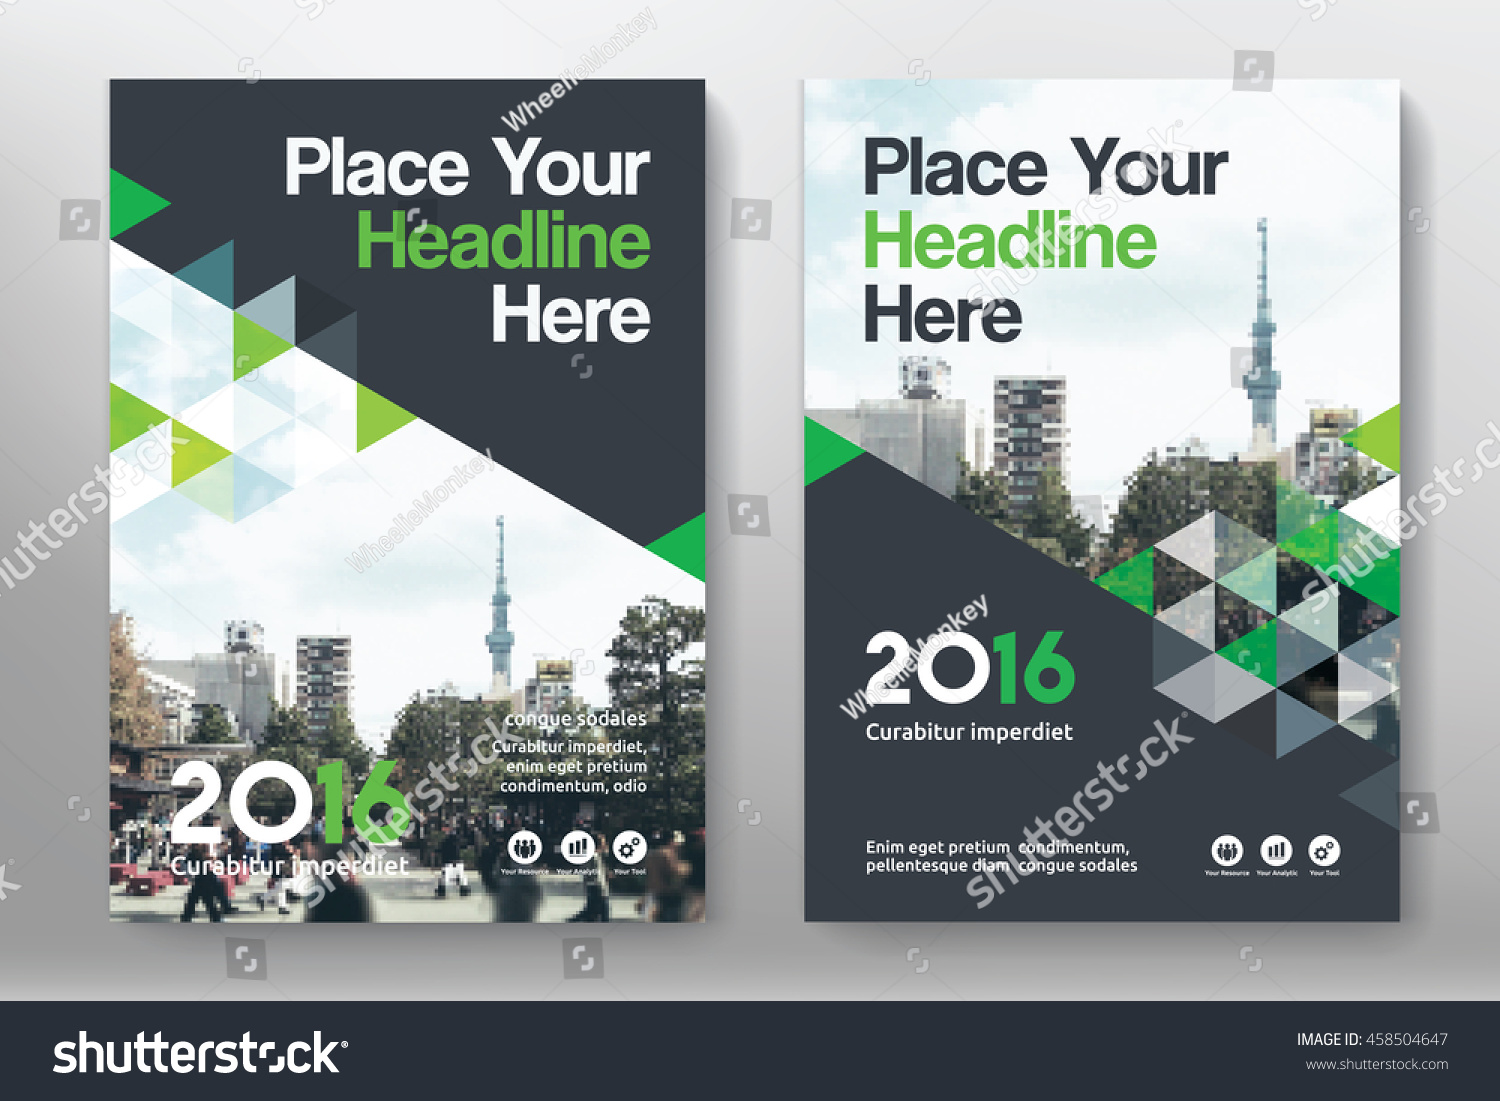 Green Color Scheme with City Background Business Book Cover Design Template in A4. Can be adapt to Brochure, Annual Report, Magazine,Poster, Corporate Presentation, Portfolio, Flyer, Banner, Website. #458504647